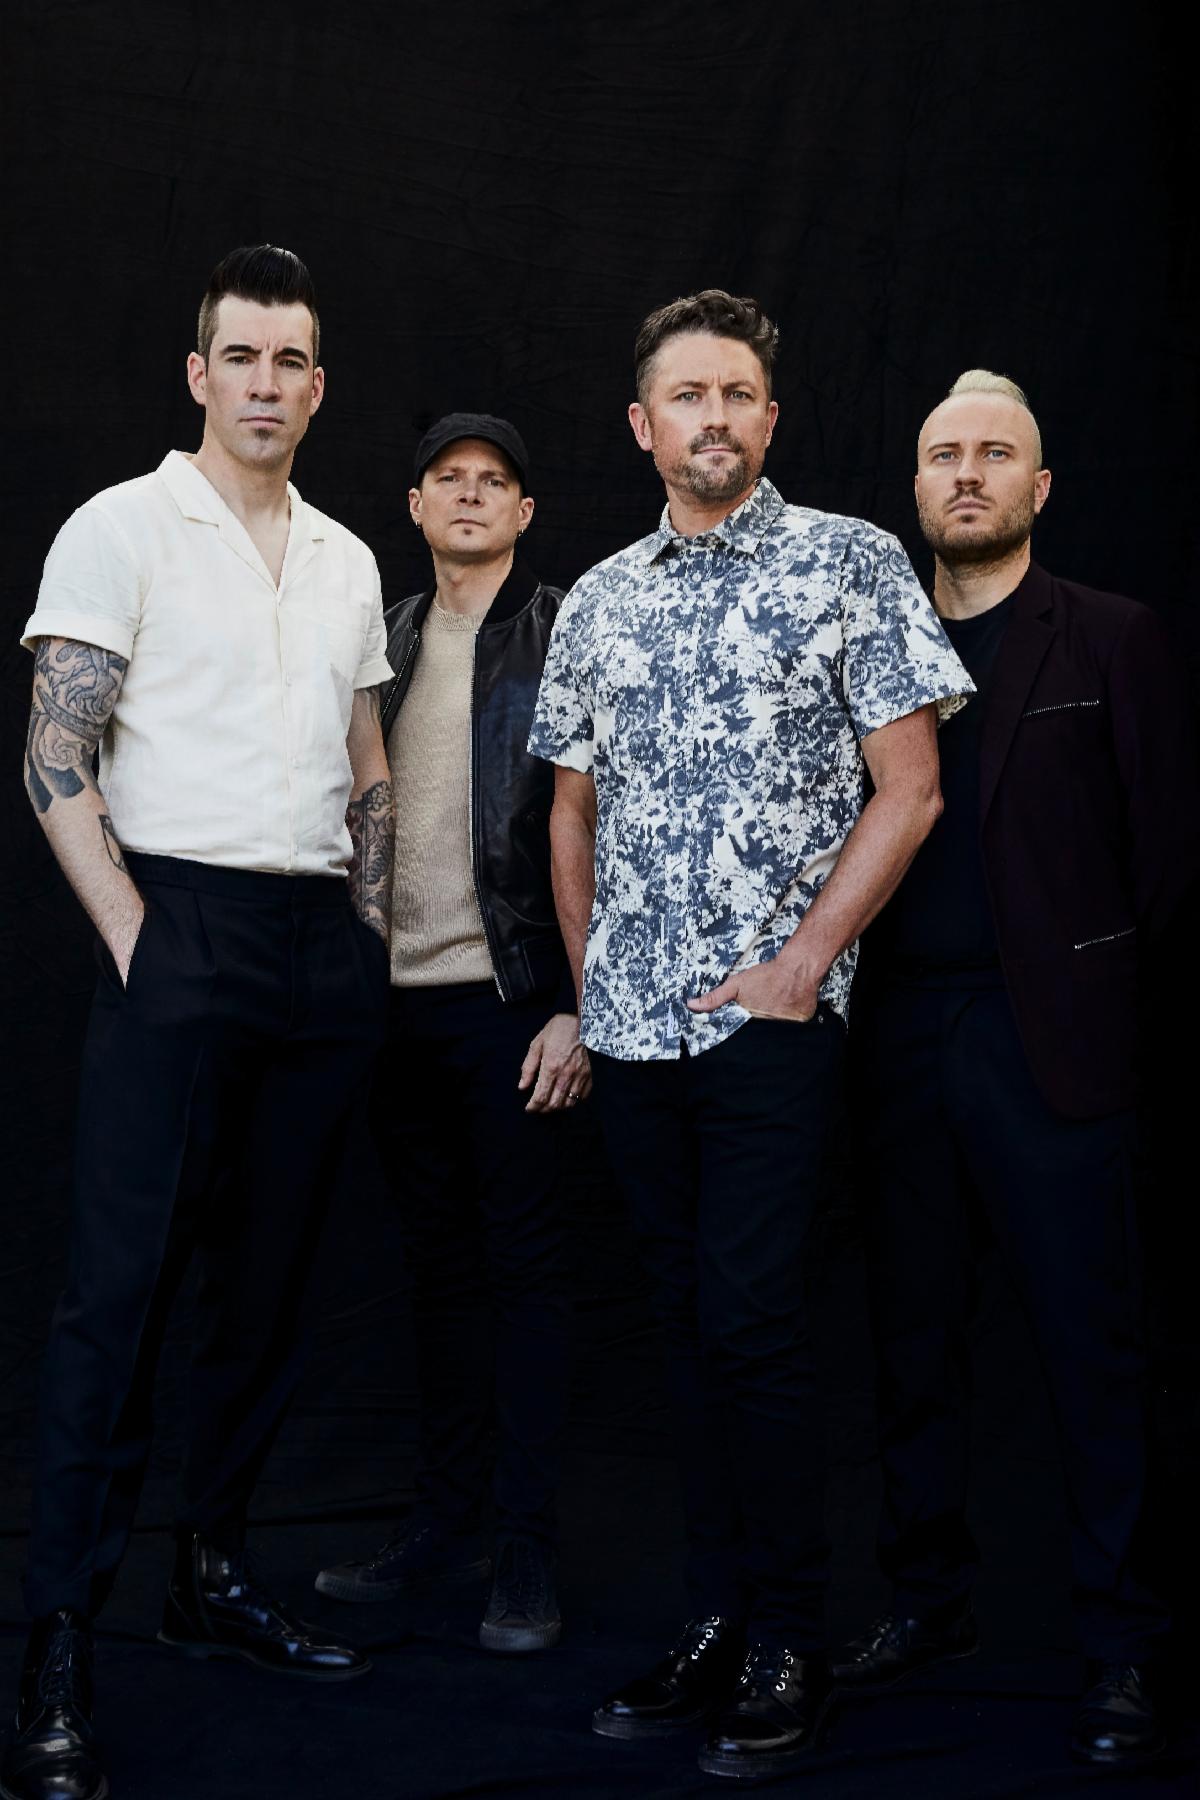 Theory Of A Deadman Releases Powerful Single and Video "History Of Violence"